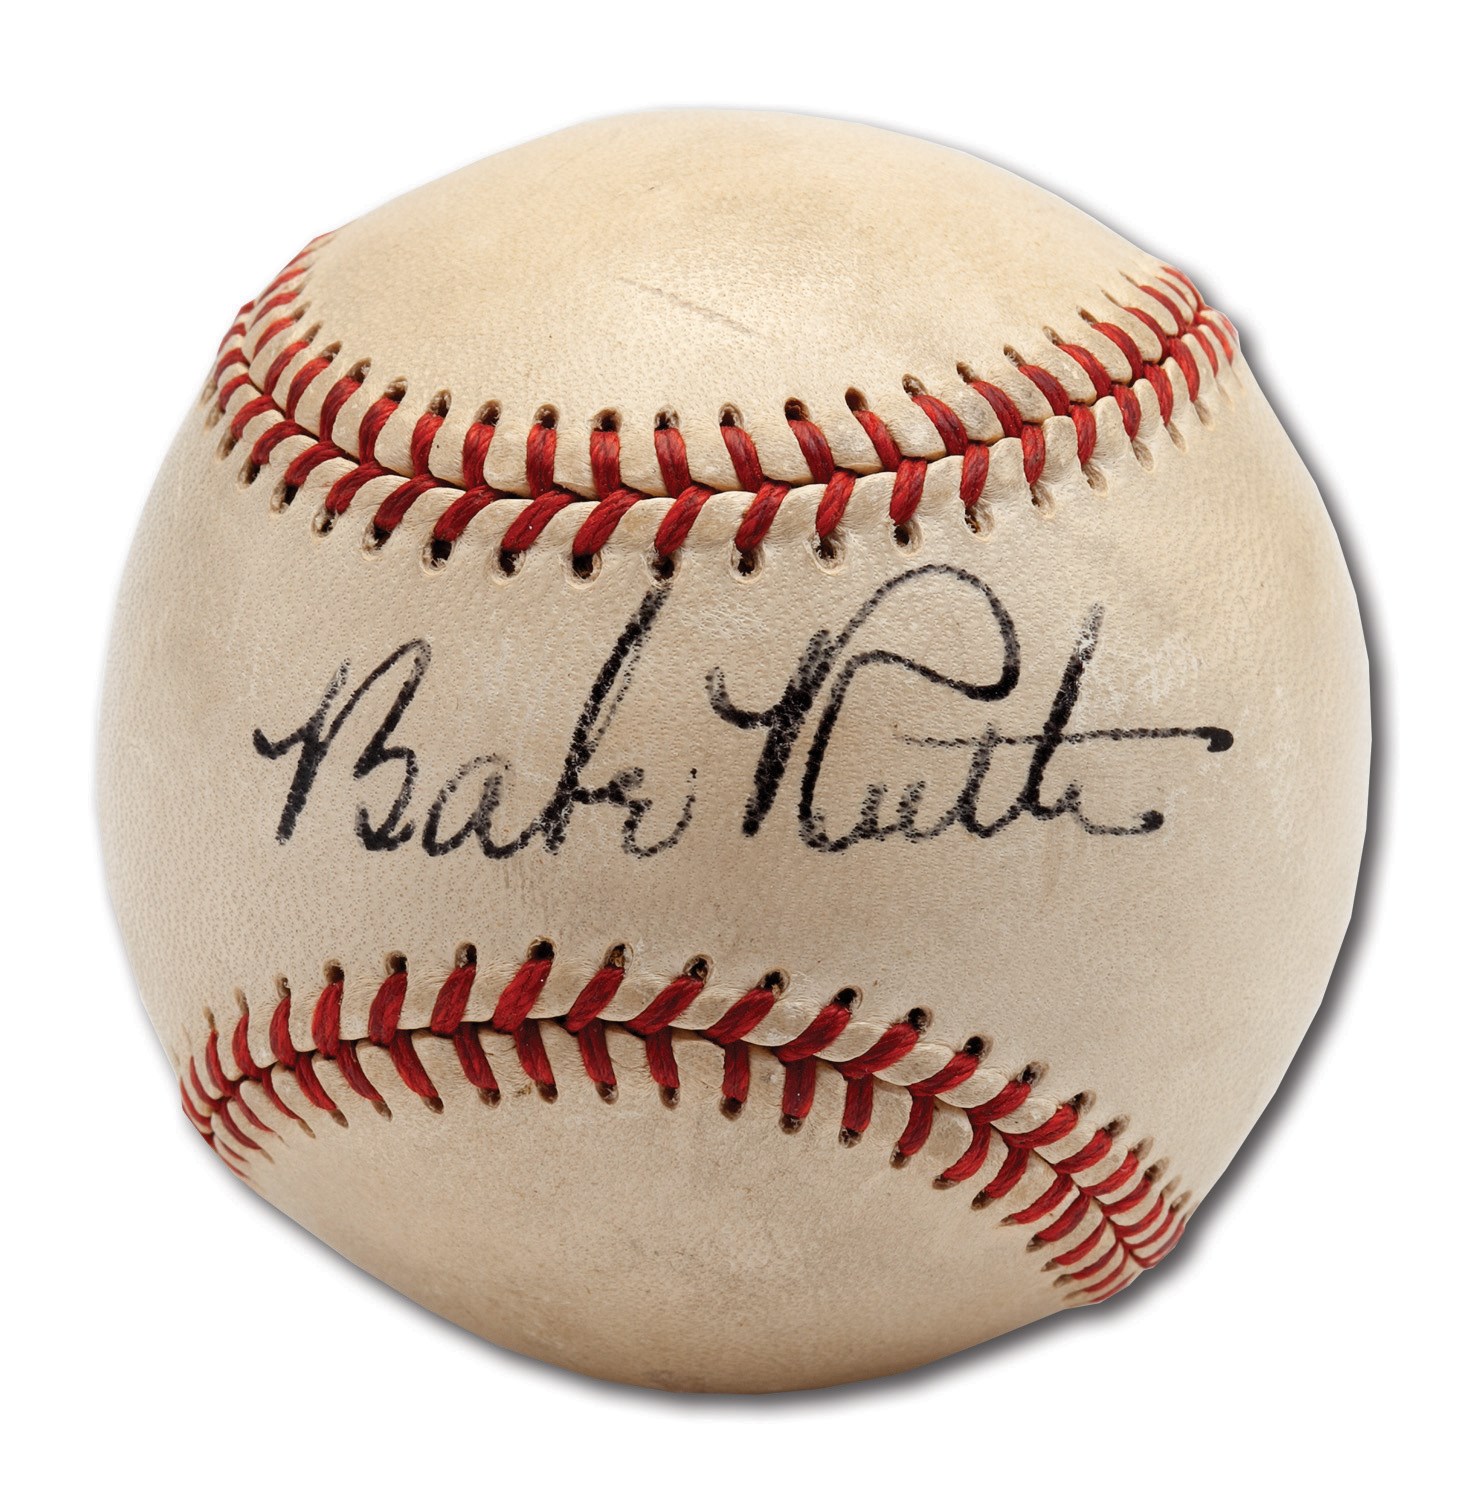 Lot Detail Stunning Babe Ruth Single Signed Oal Harridge Baseball With Psa Dna Mint Autograph